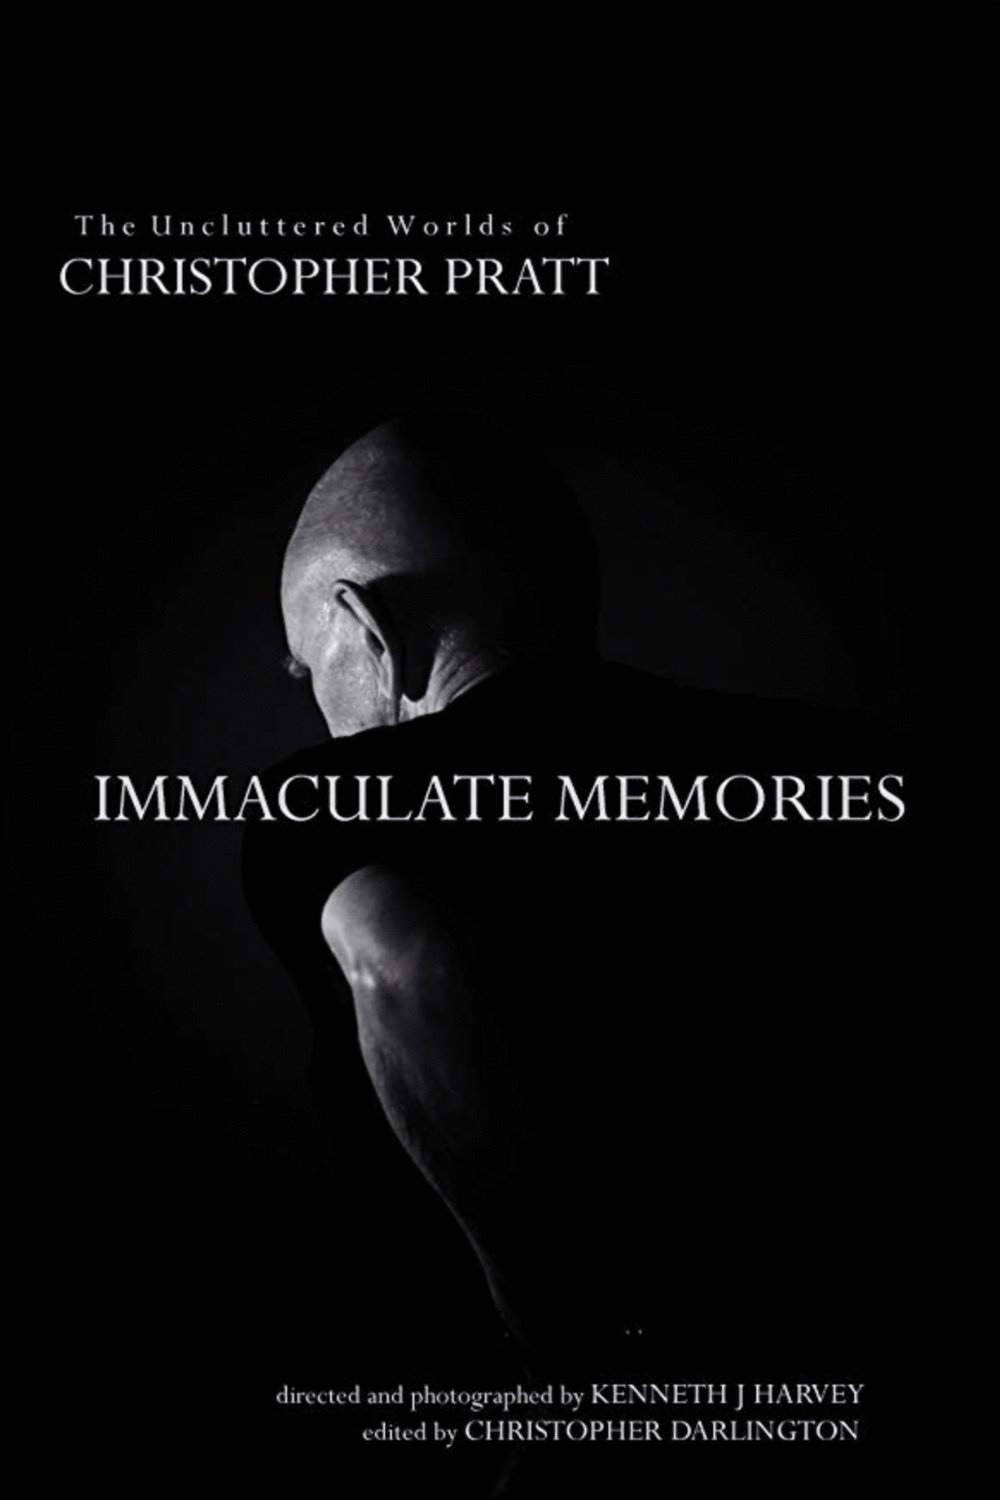 Poster of the movie Immaculate Memories: The Uncluttered Worlds of Christopher Pratt